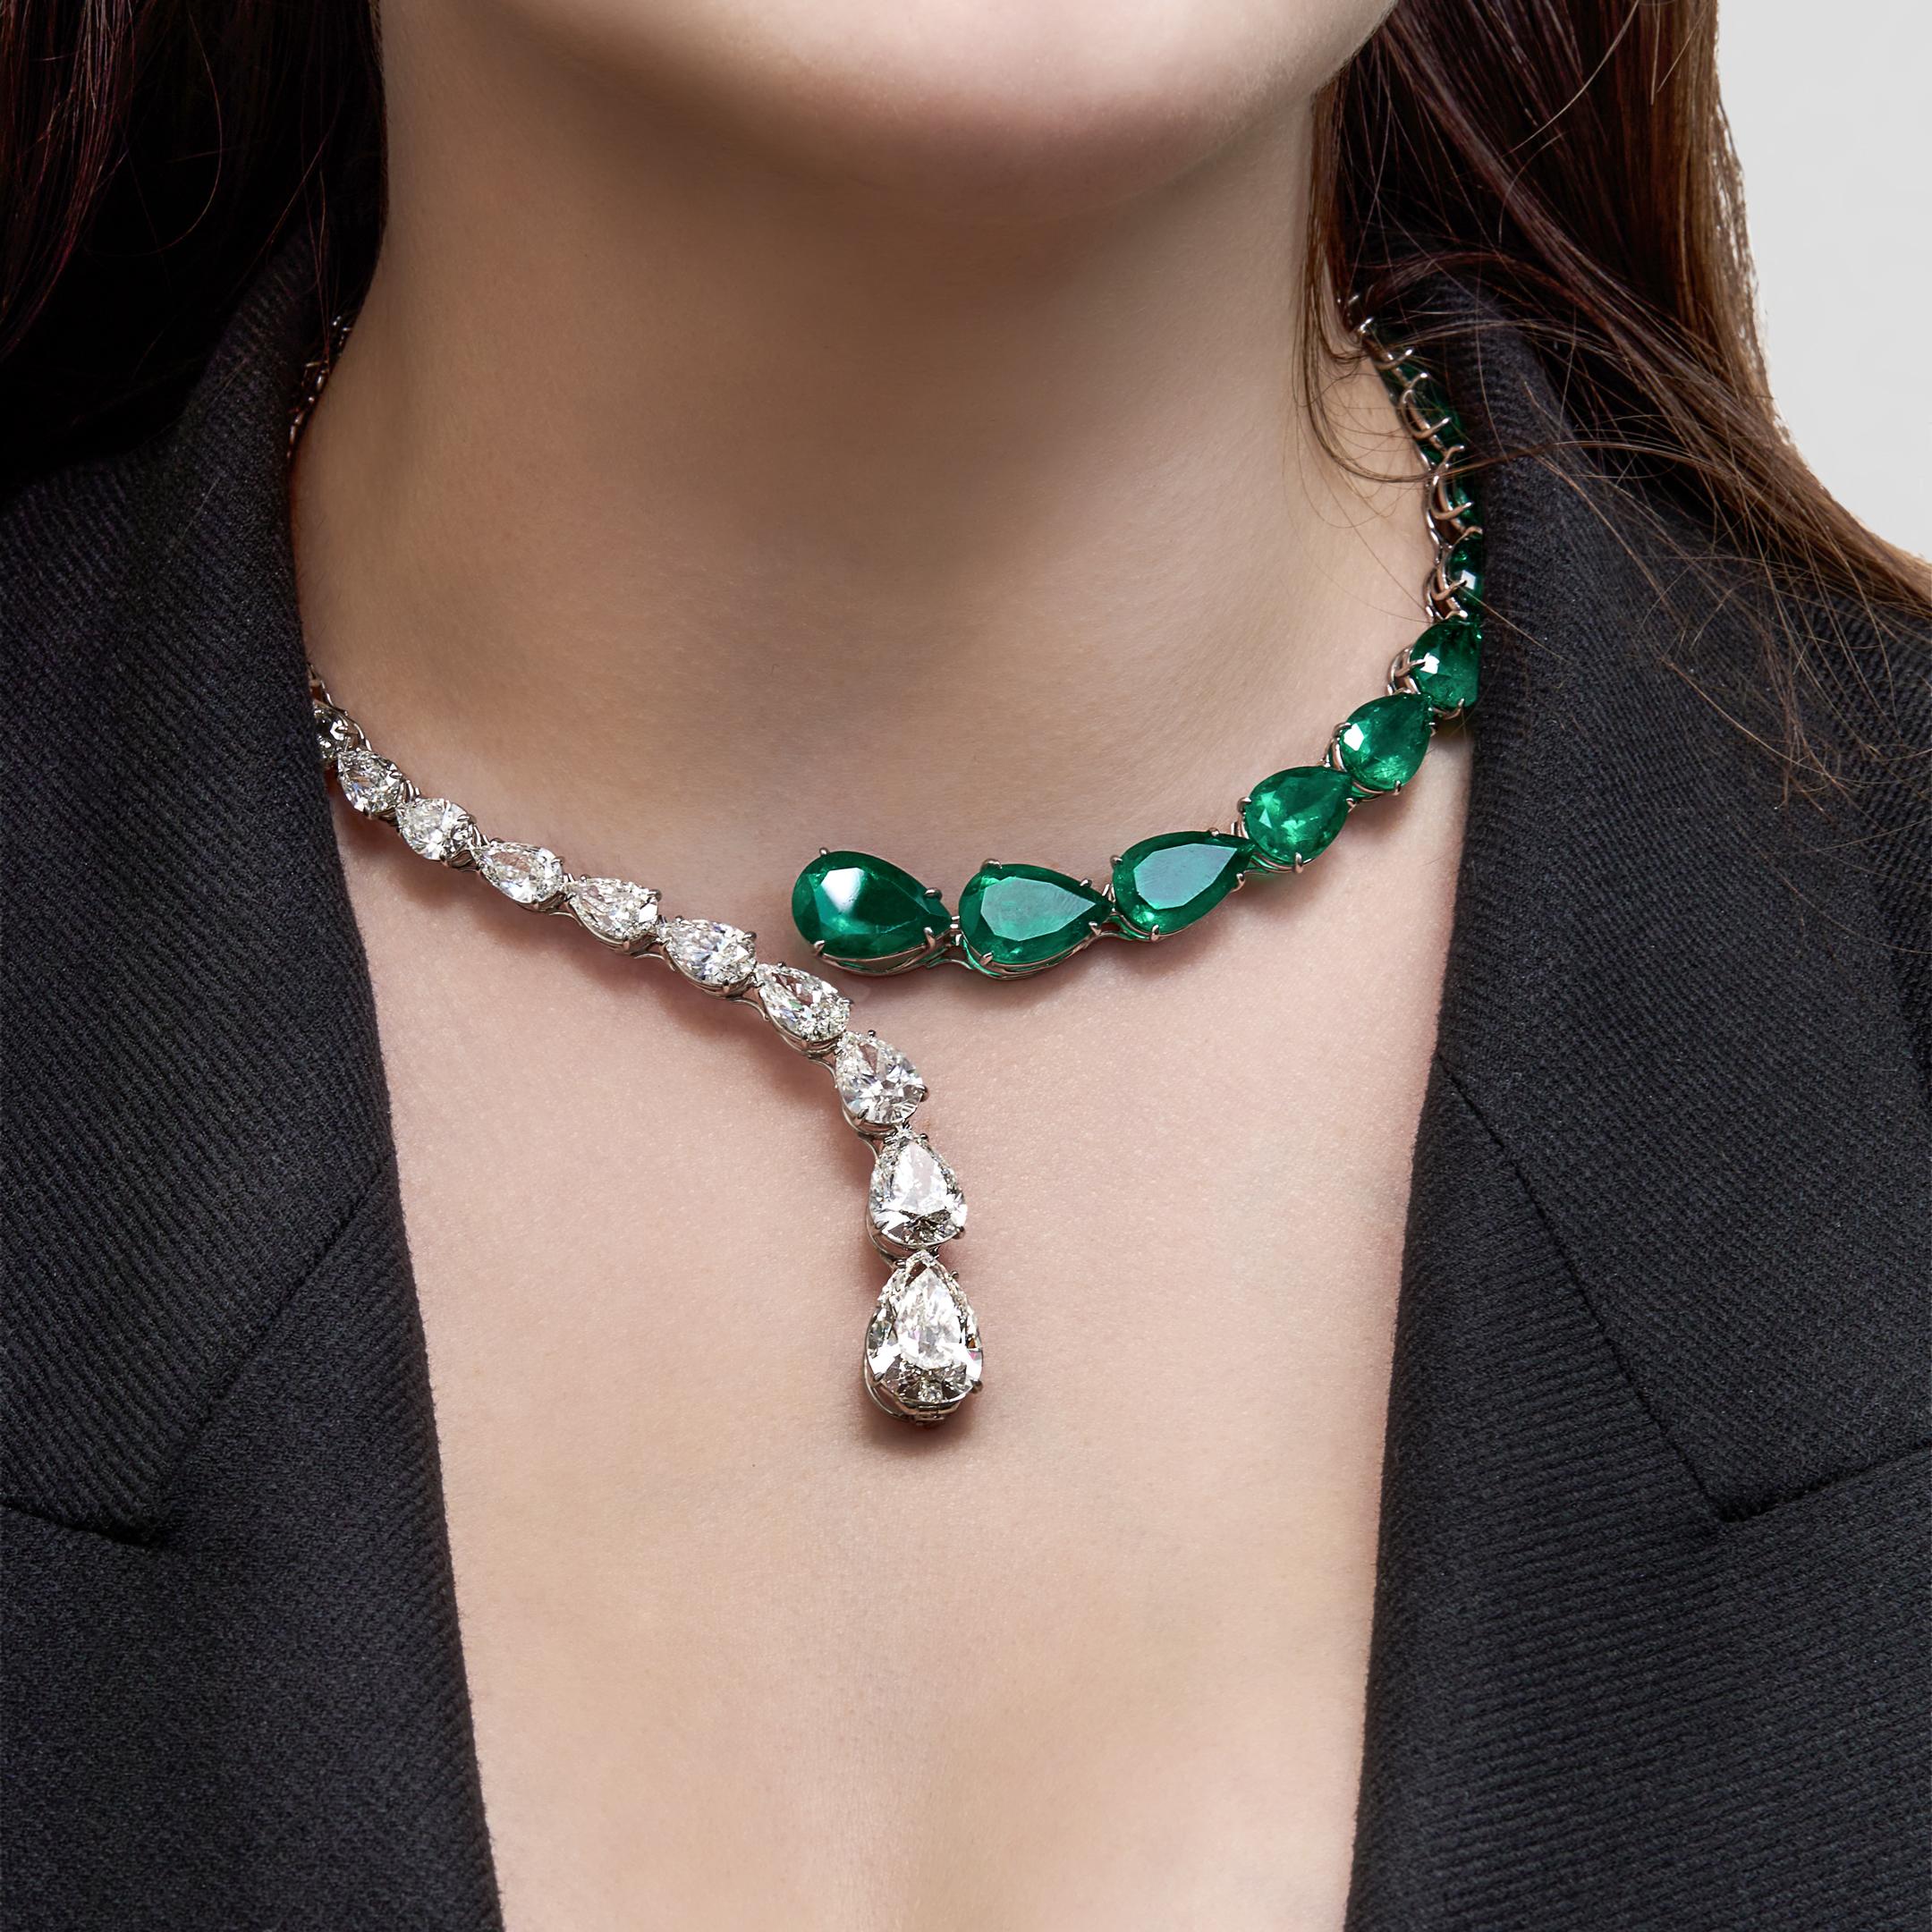 Introducing our Colombian Emerald and Diamond  Necklace, a stunning piece that captures the essence of elegance and luxury. Crafted in 18-karat white gold, this necklace features a mesmerizing arrangement of Colombian emeralds and diamonds.

Each